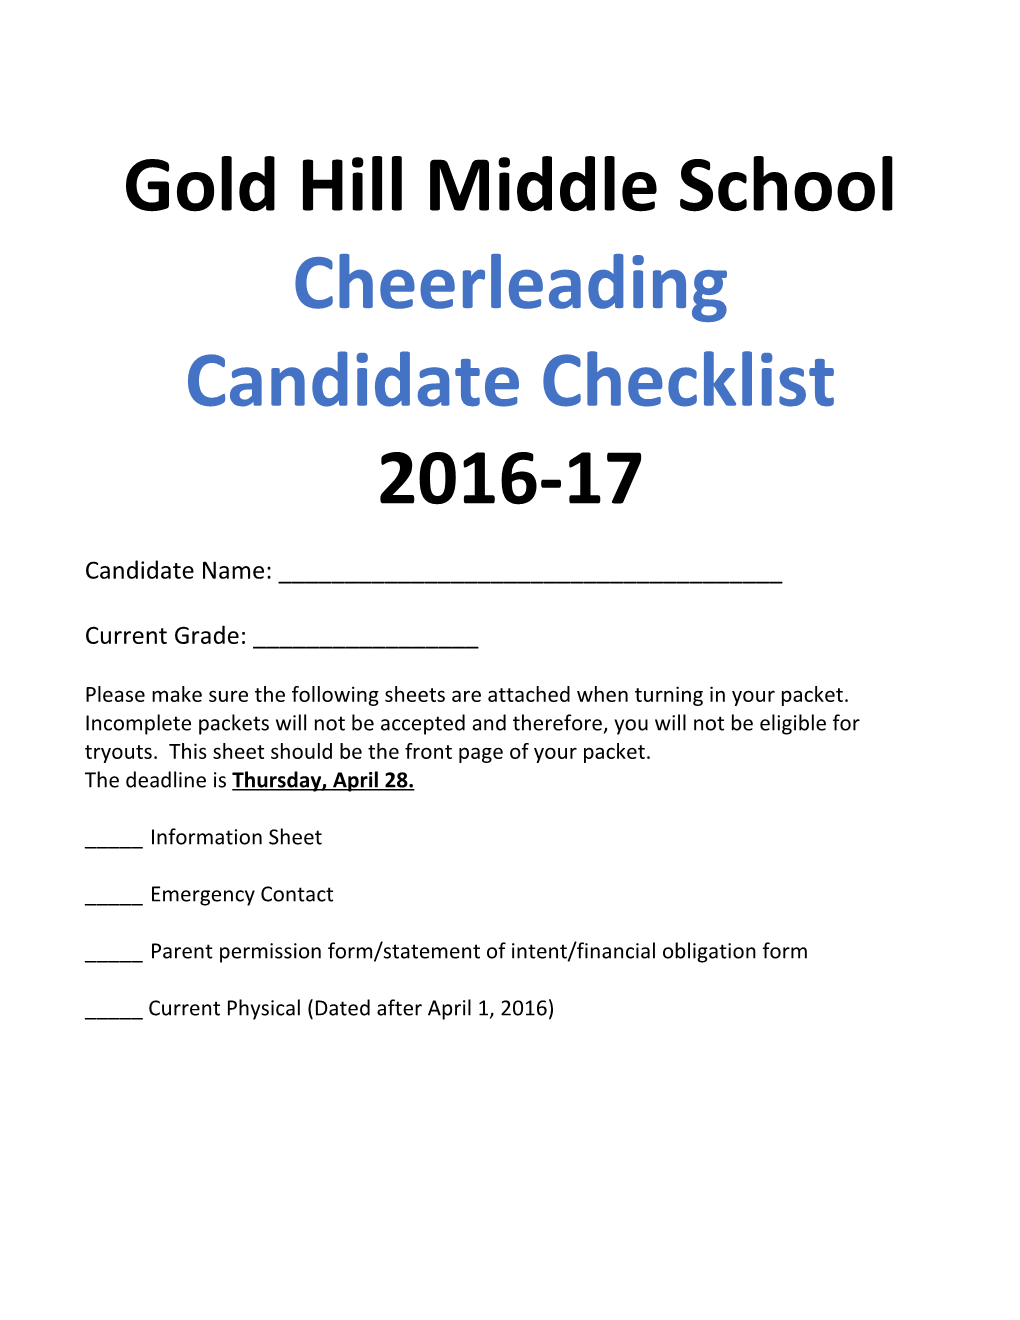 Gold Hill Middle School